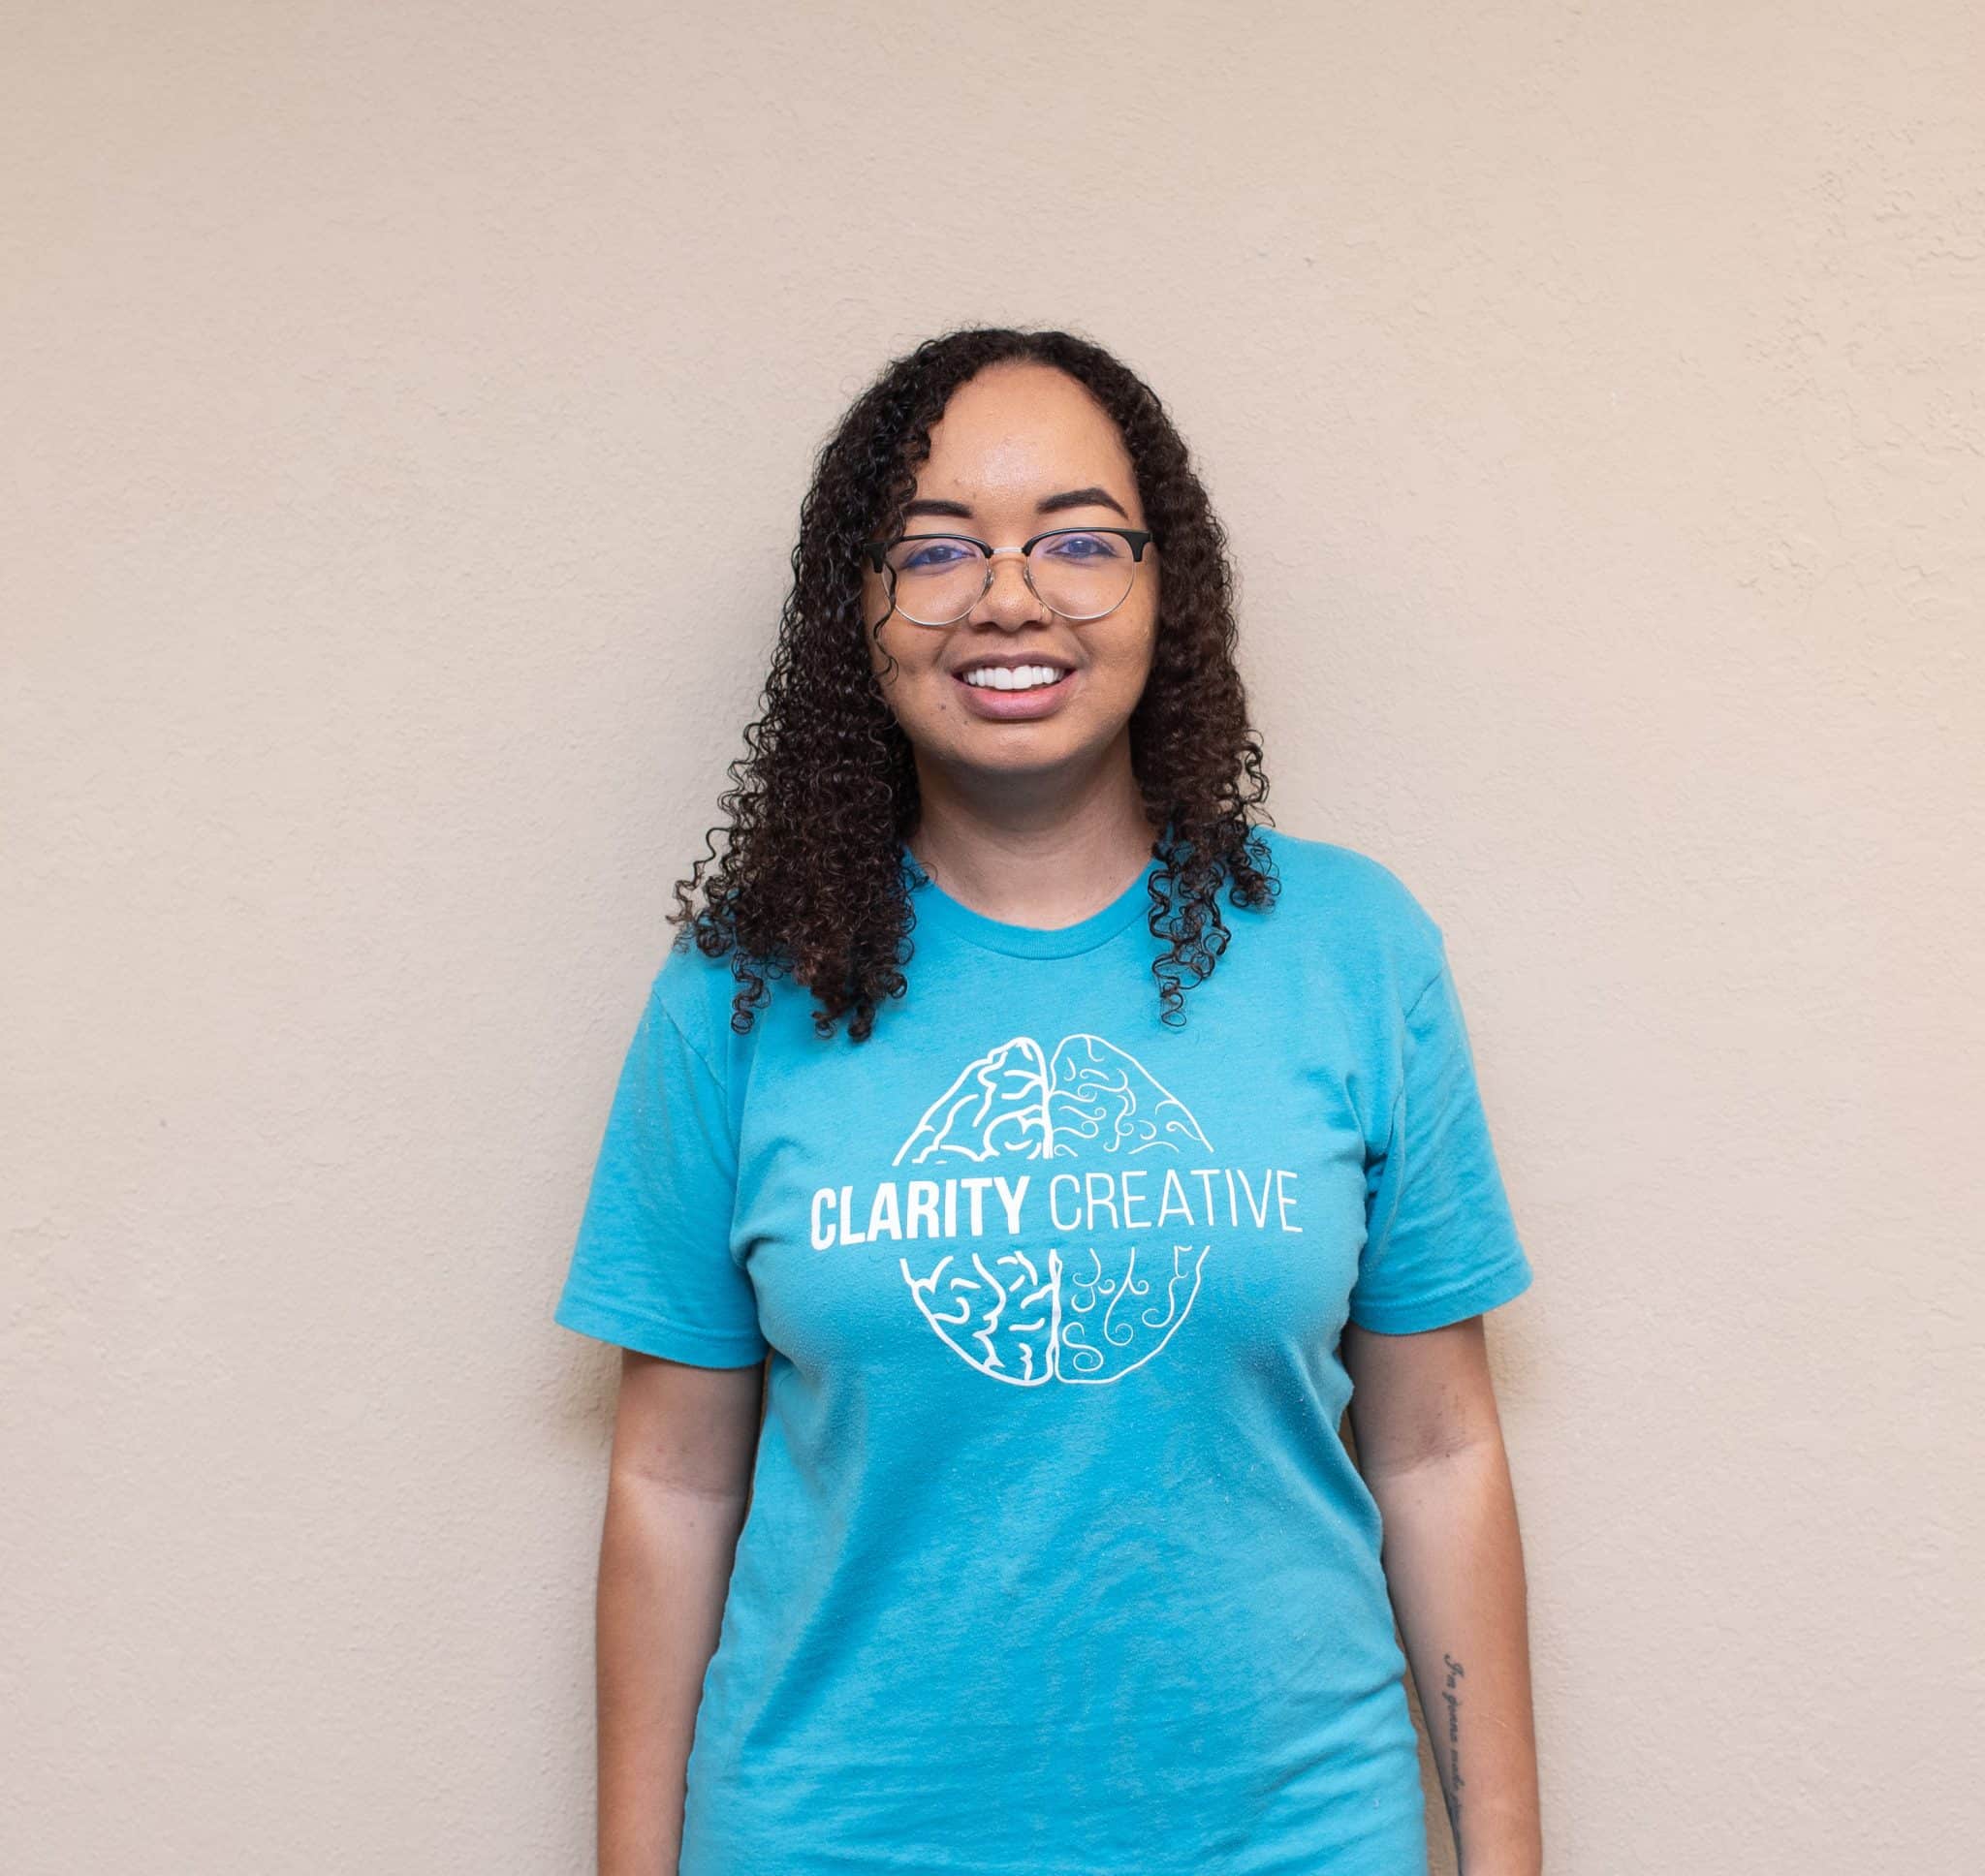 Lux from Clarity Creative Group. She has dark curly hair, glasses, and is wearing a teal Clarity Creative shirt